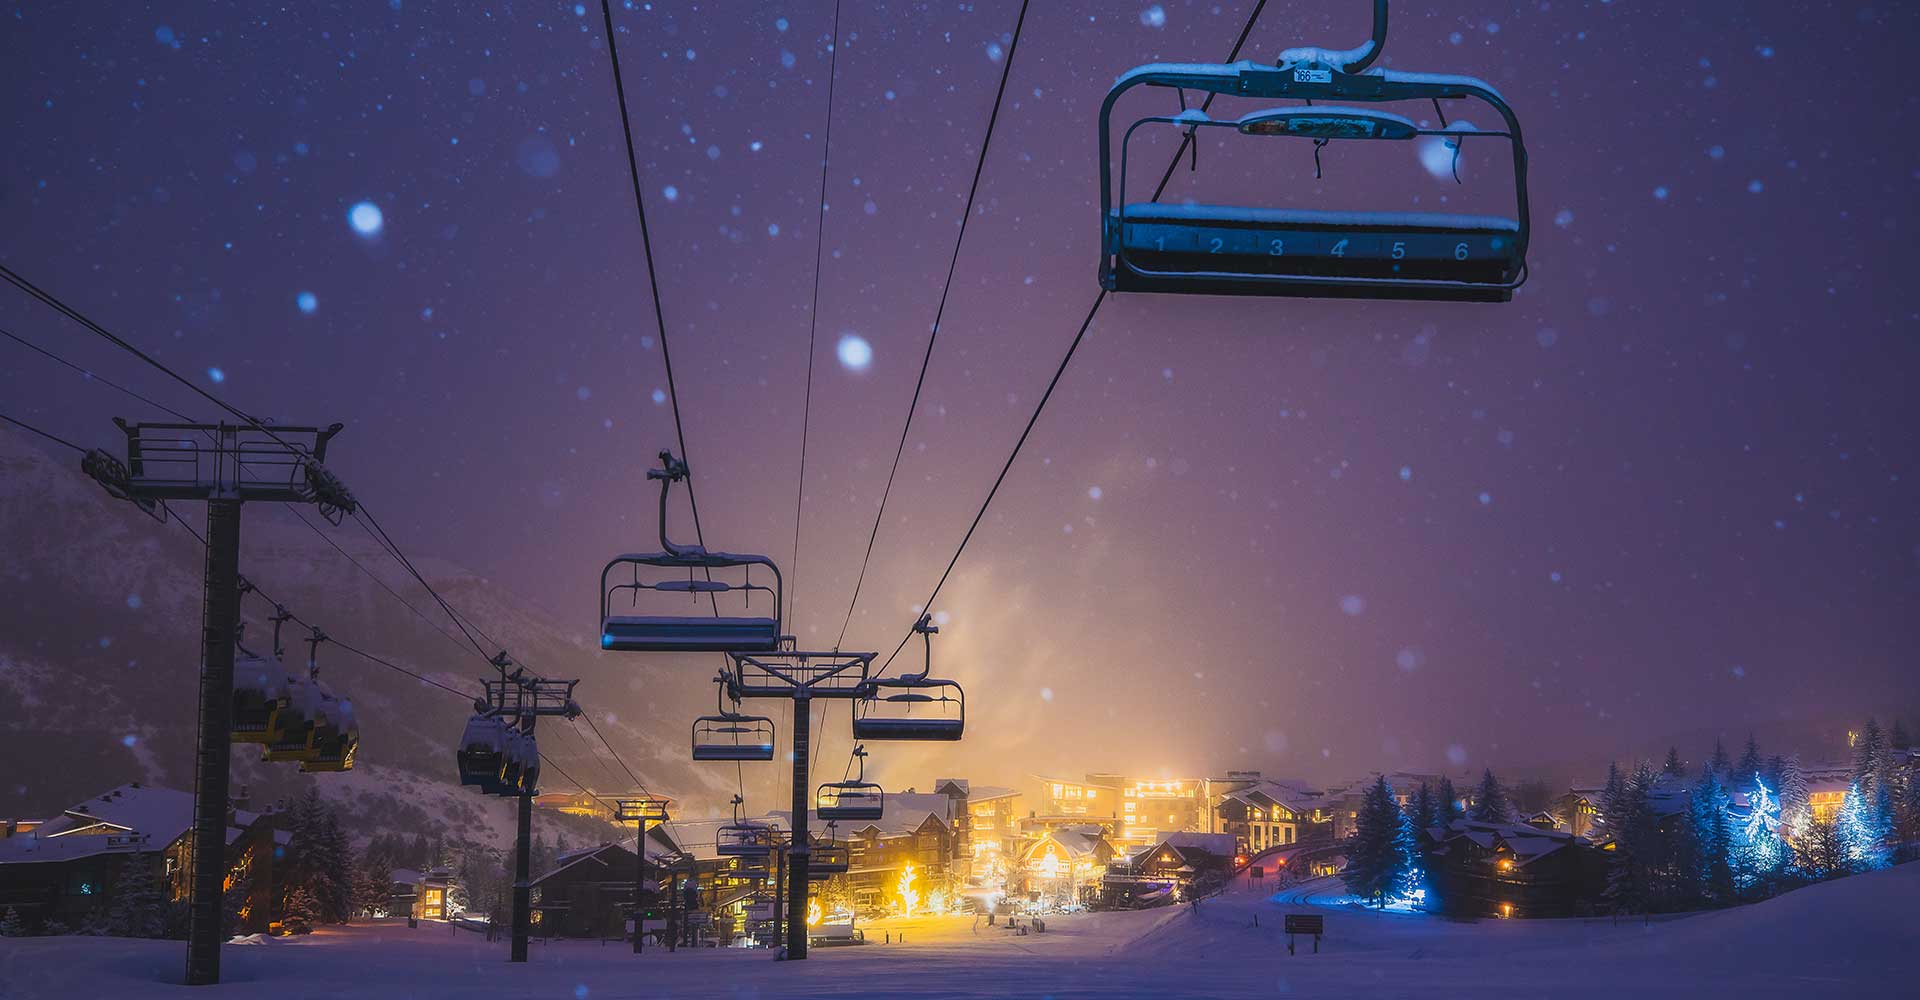 Closed lifts at night in a snowstorm at Aspen Snowmass